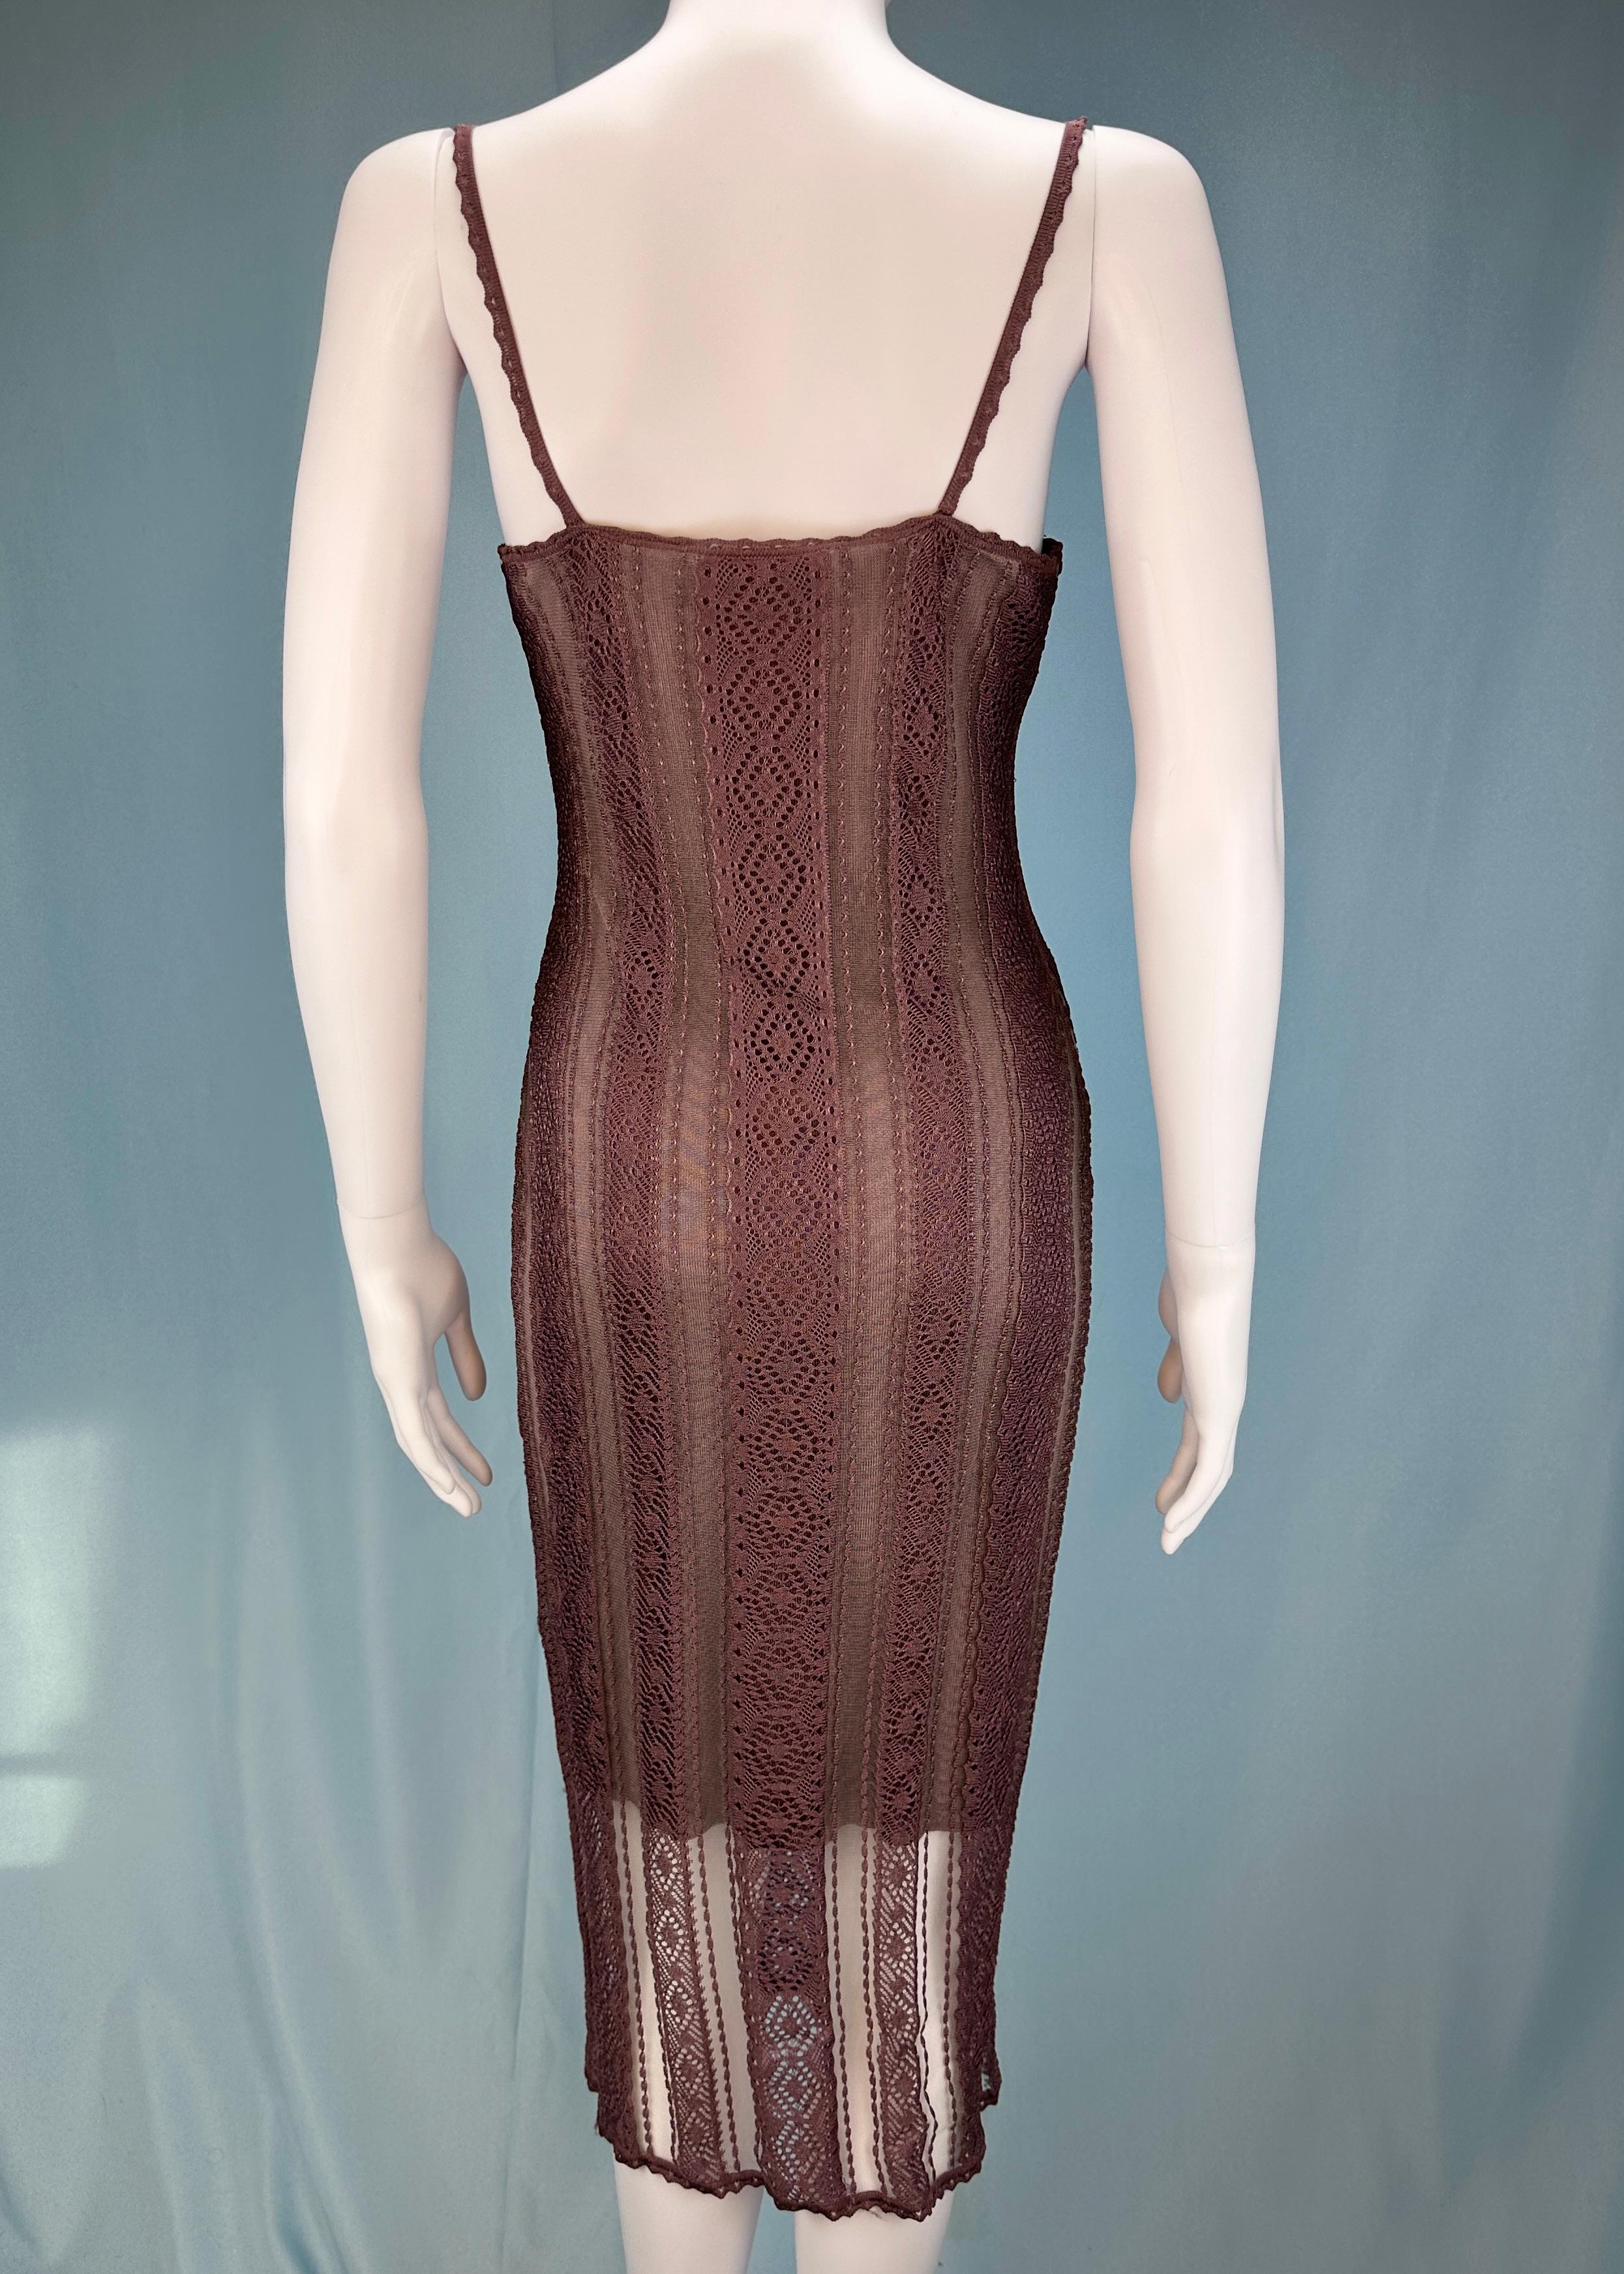 Vintage Dior
by John Galliano 
Spring 2000 

Mauve purple knit mesh midi dress
Purple underdress attached 

Size UK 10 / US 6
Can fit a variety of sizes due to stretch
Measurements (laid flat) -

32-36” chest 
36-32” waist 
35-40” hips
44” length 